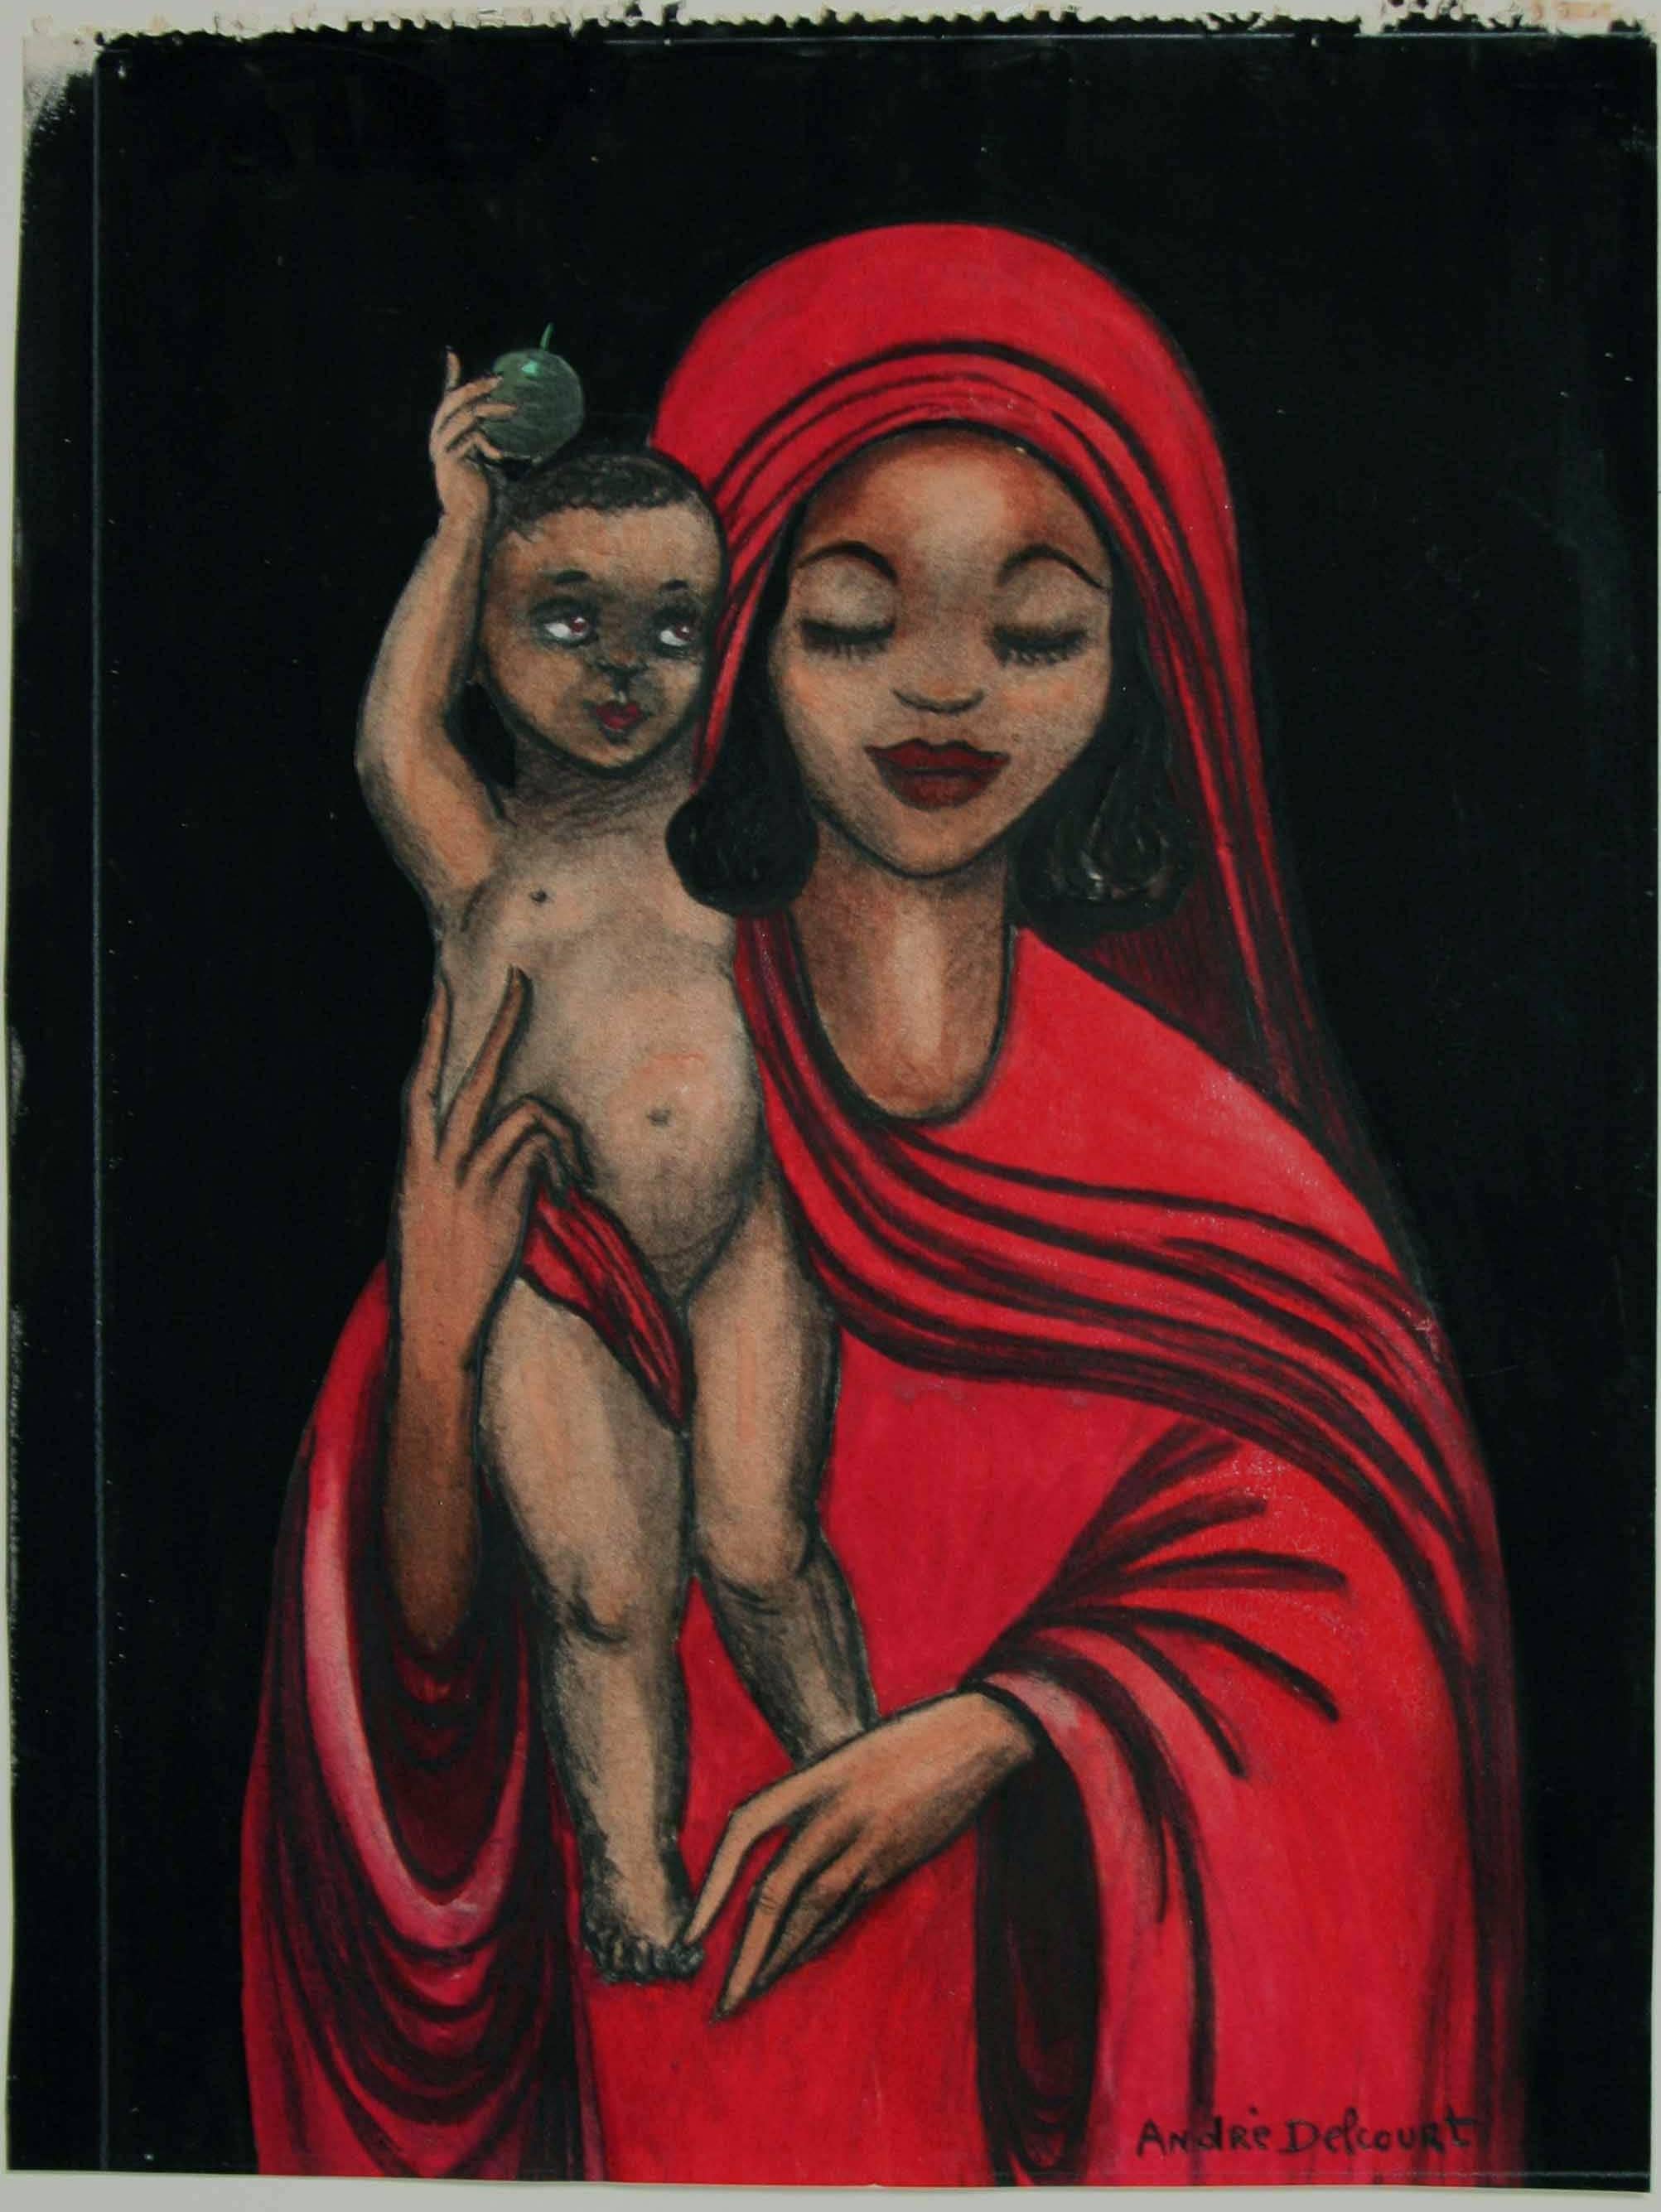 Black Madonna - Print by Delcourt, André.